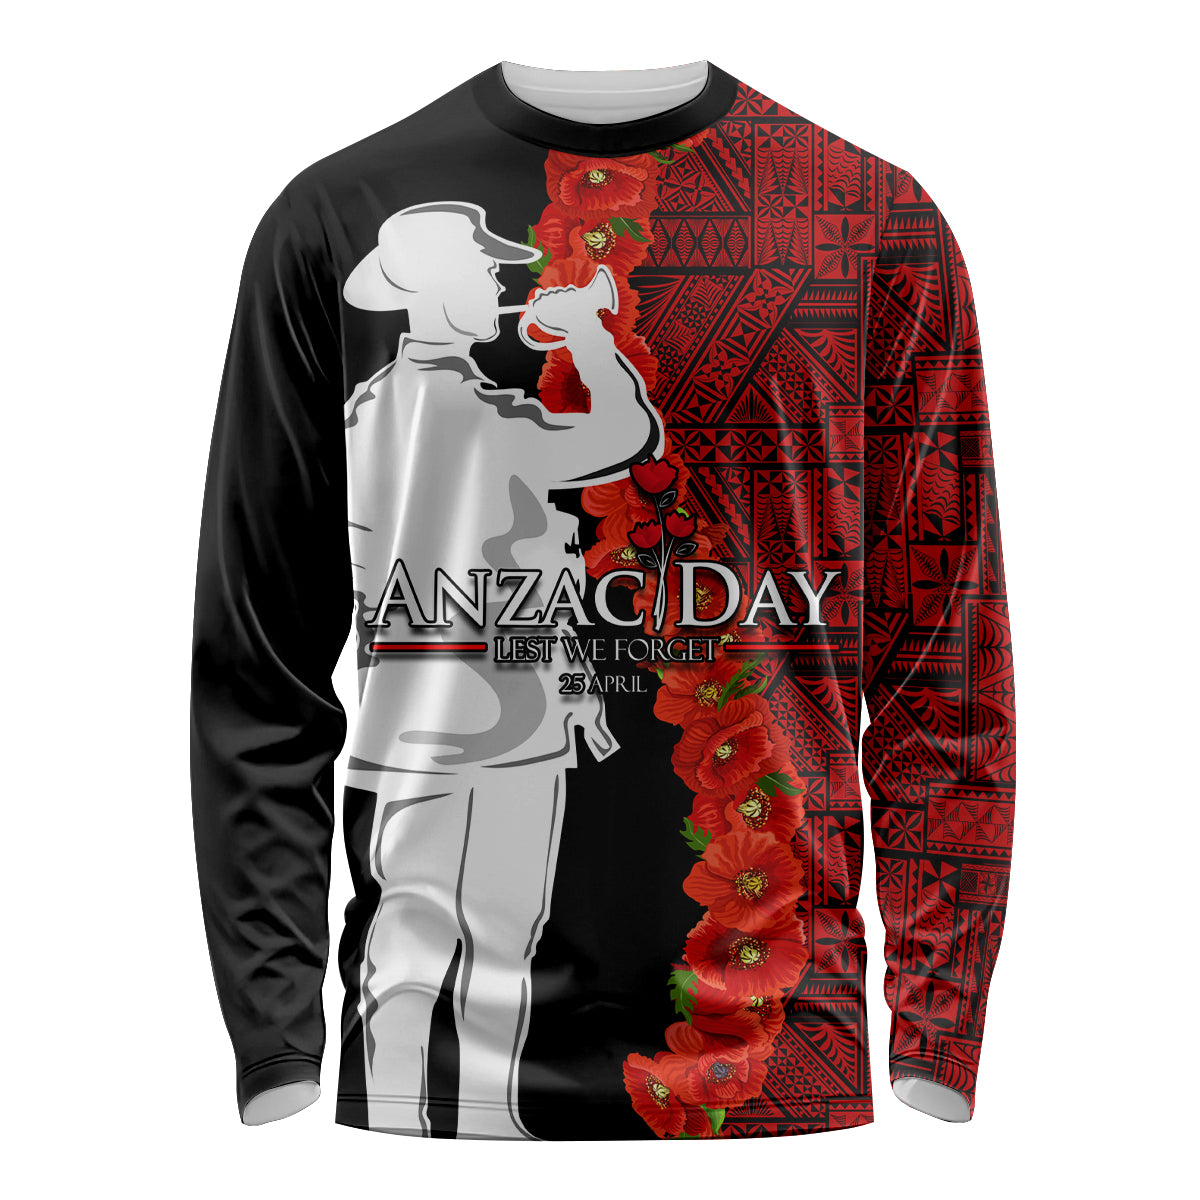 Tonga ANZAC Day Long Sleeve Shirt Red Poppies Flower Soldier Lest We Forget LT03 Unisex Red - Polynesian Pride